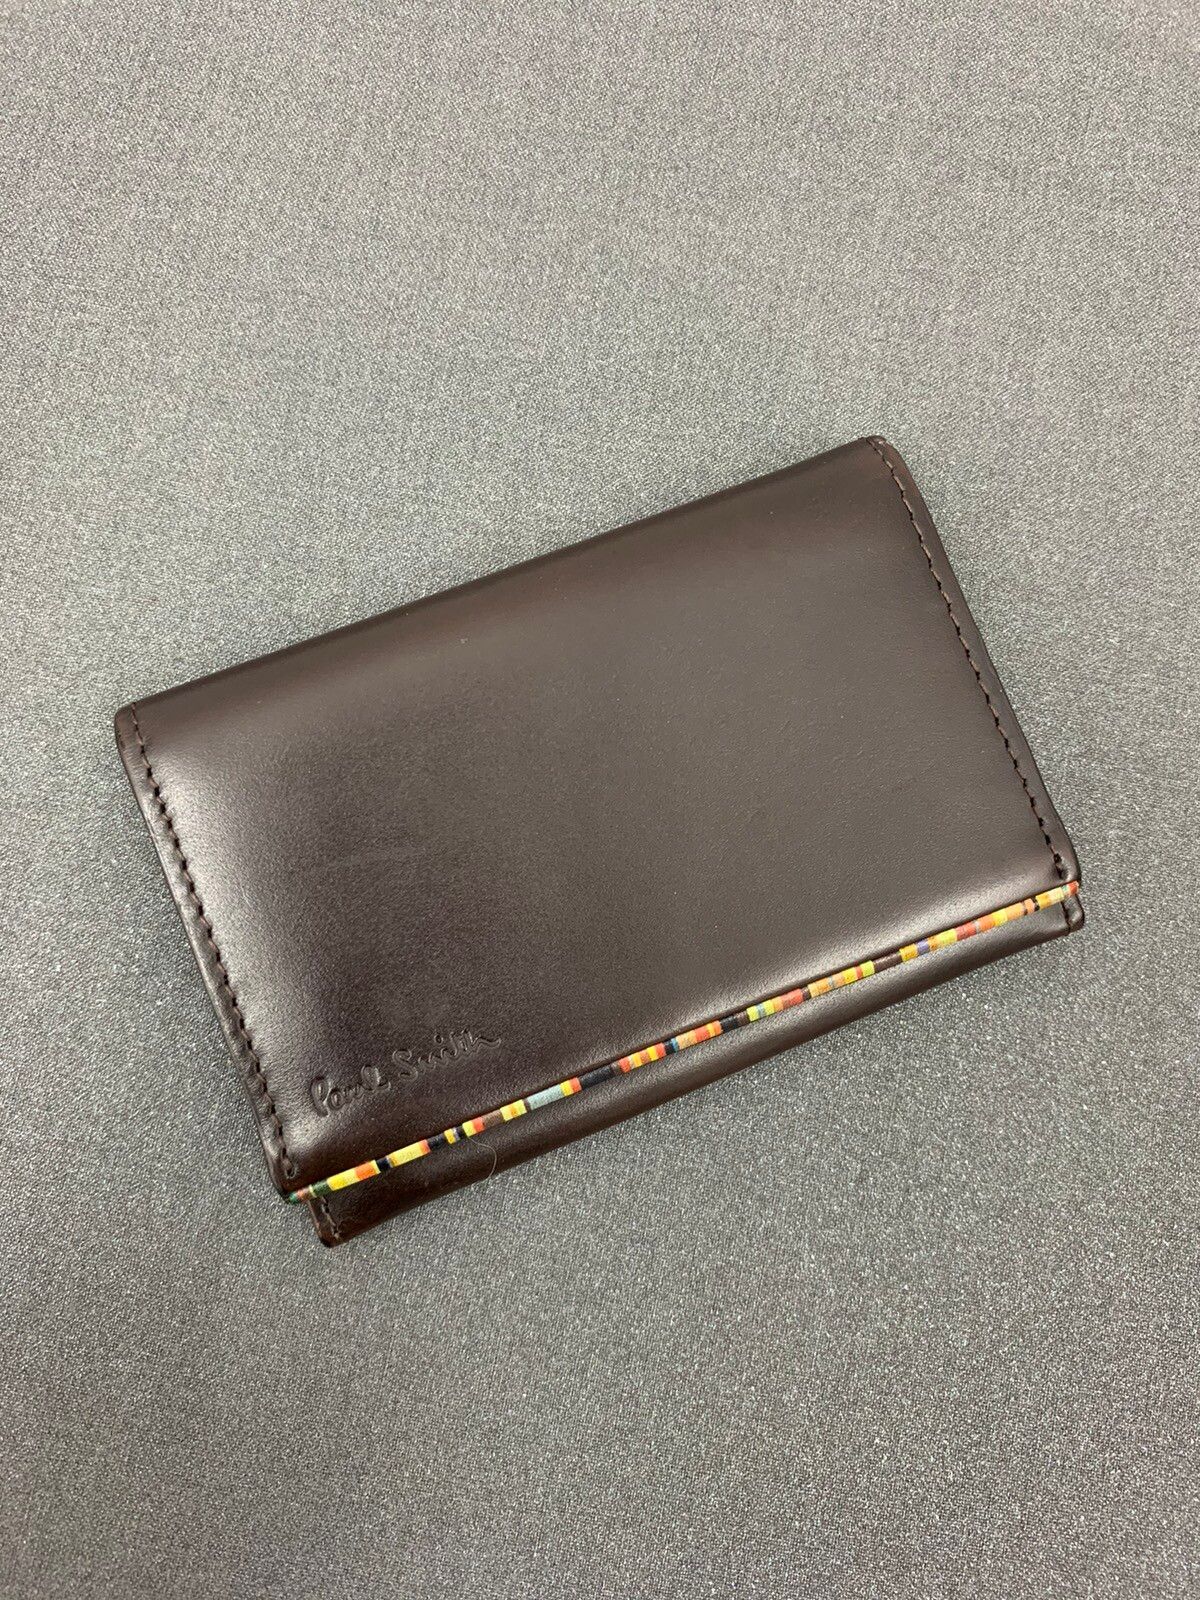 Paul Smith Card Holder Wallet Leather - 1